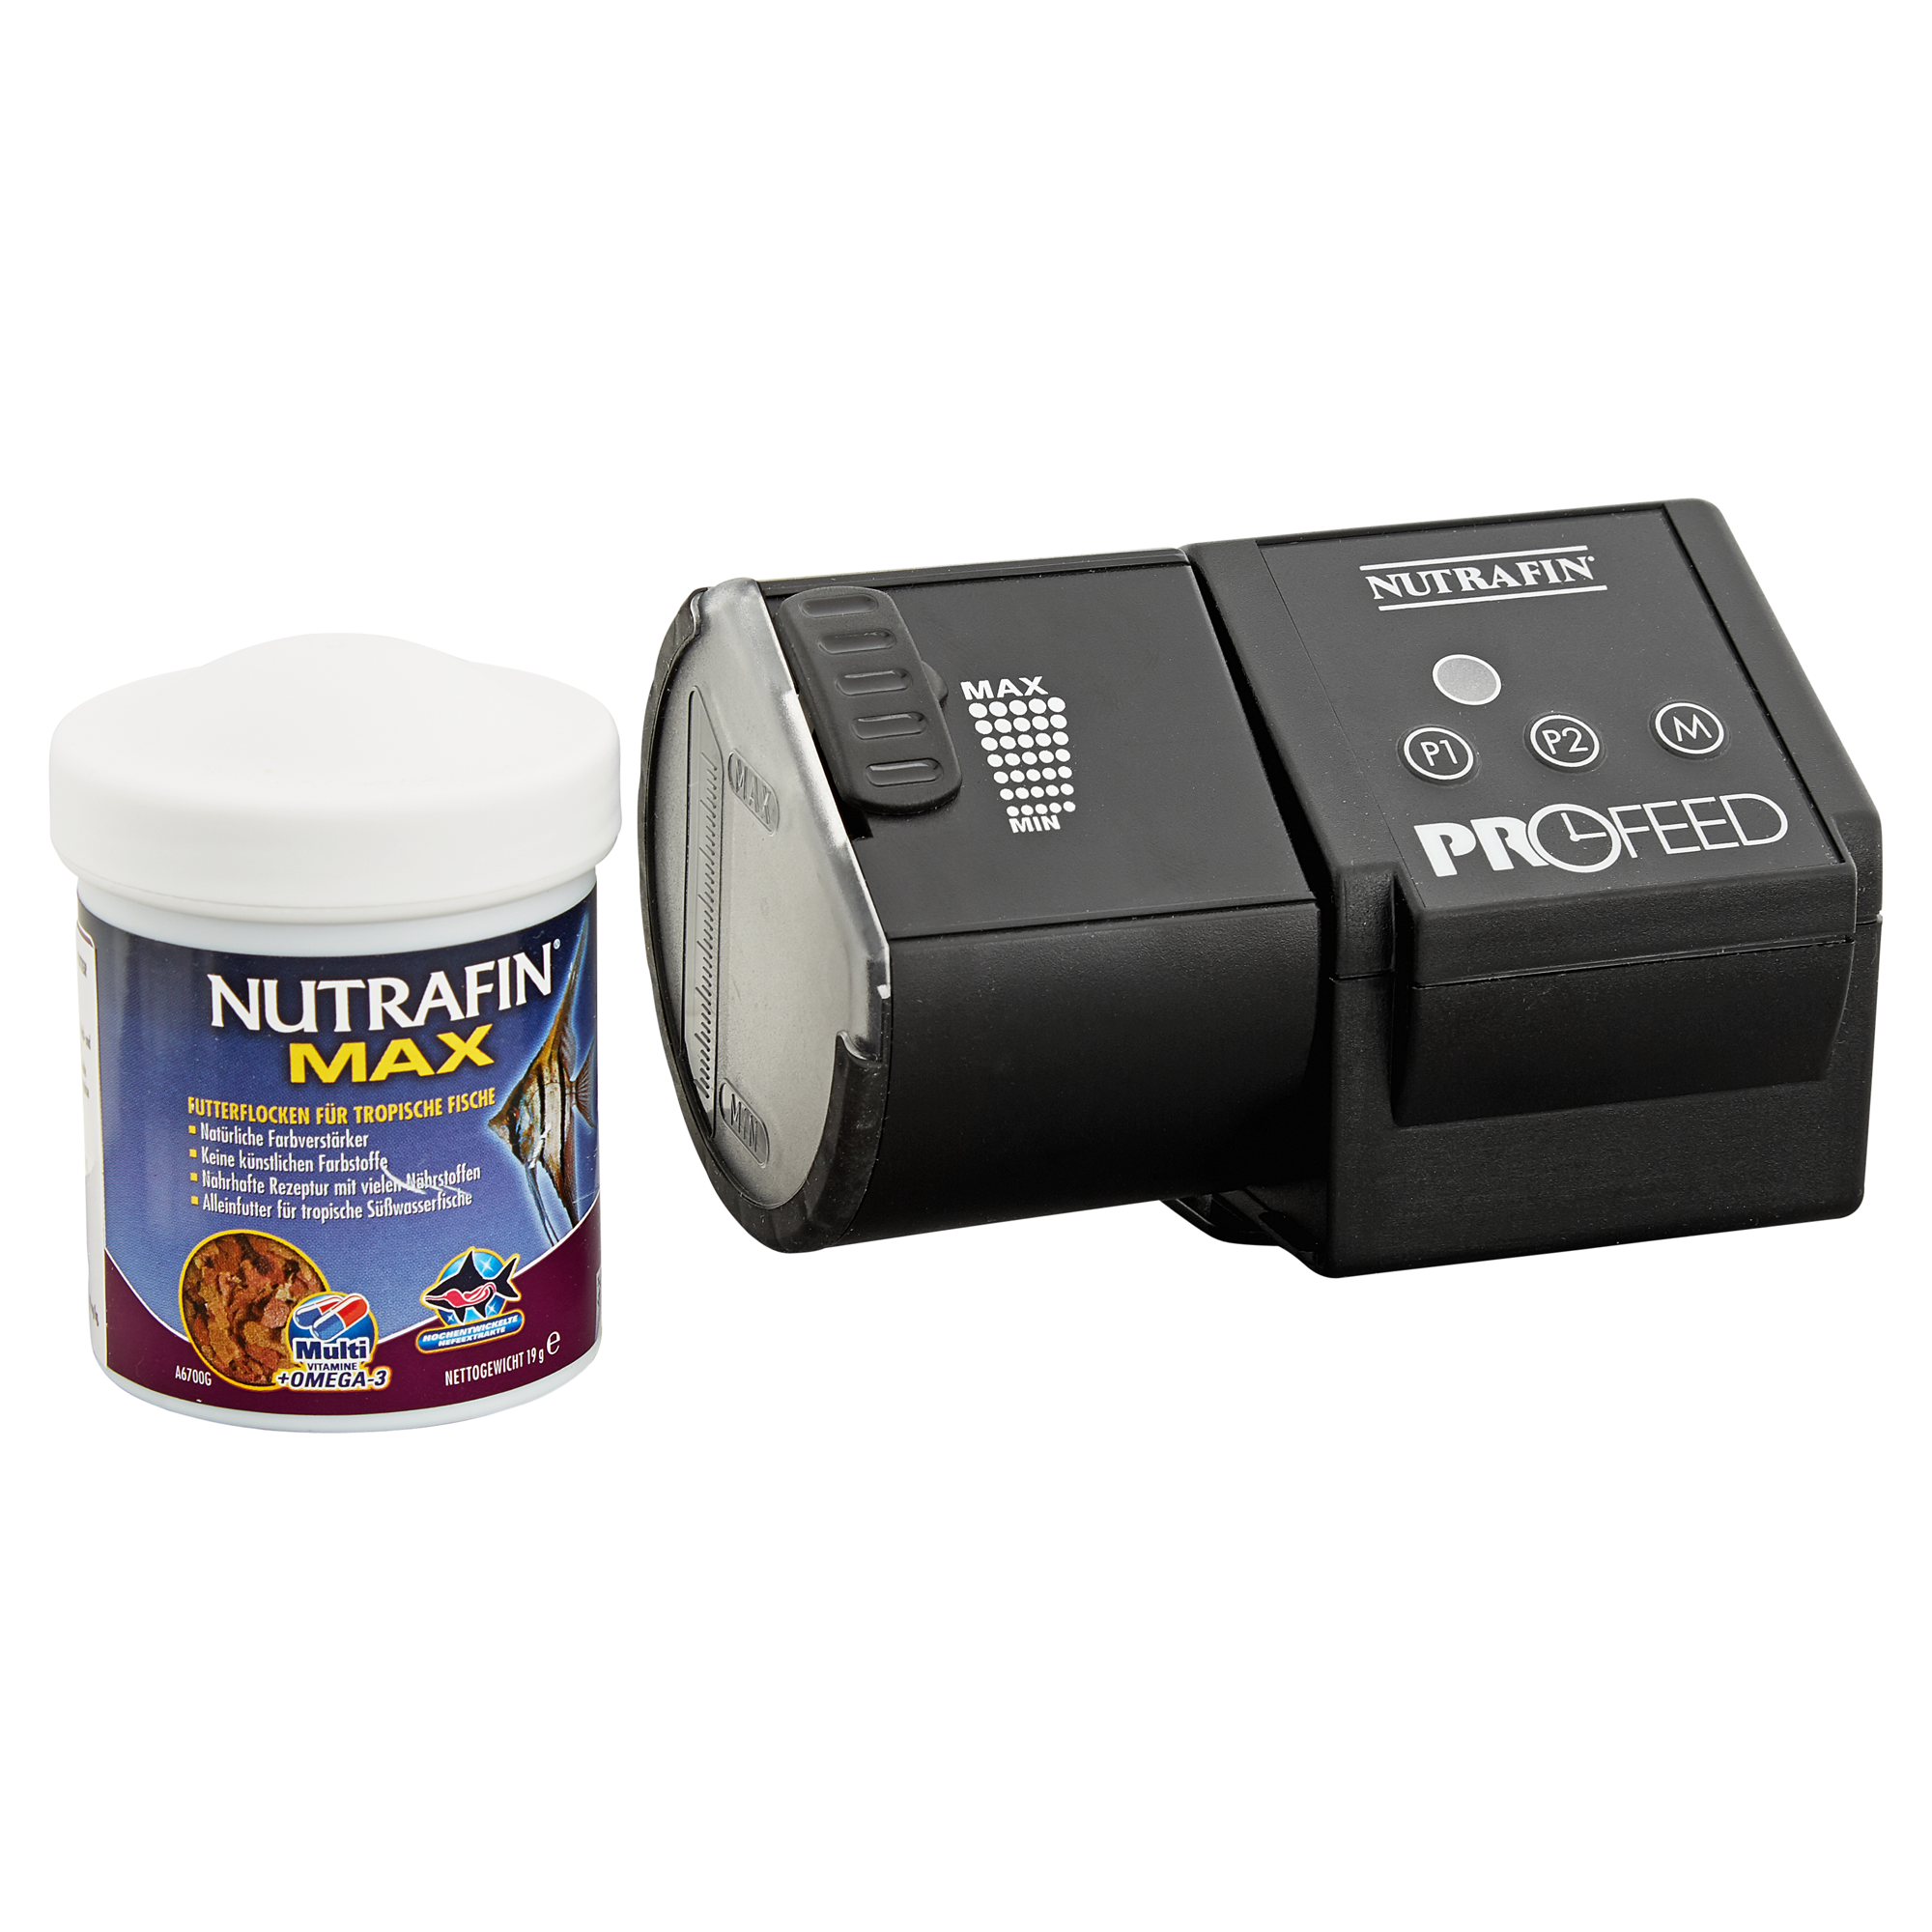 Aquarien-Futterautomat "Nutrafin Profeed" + product picture